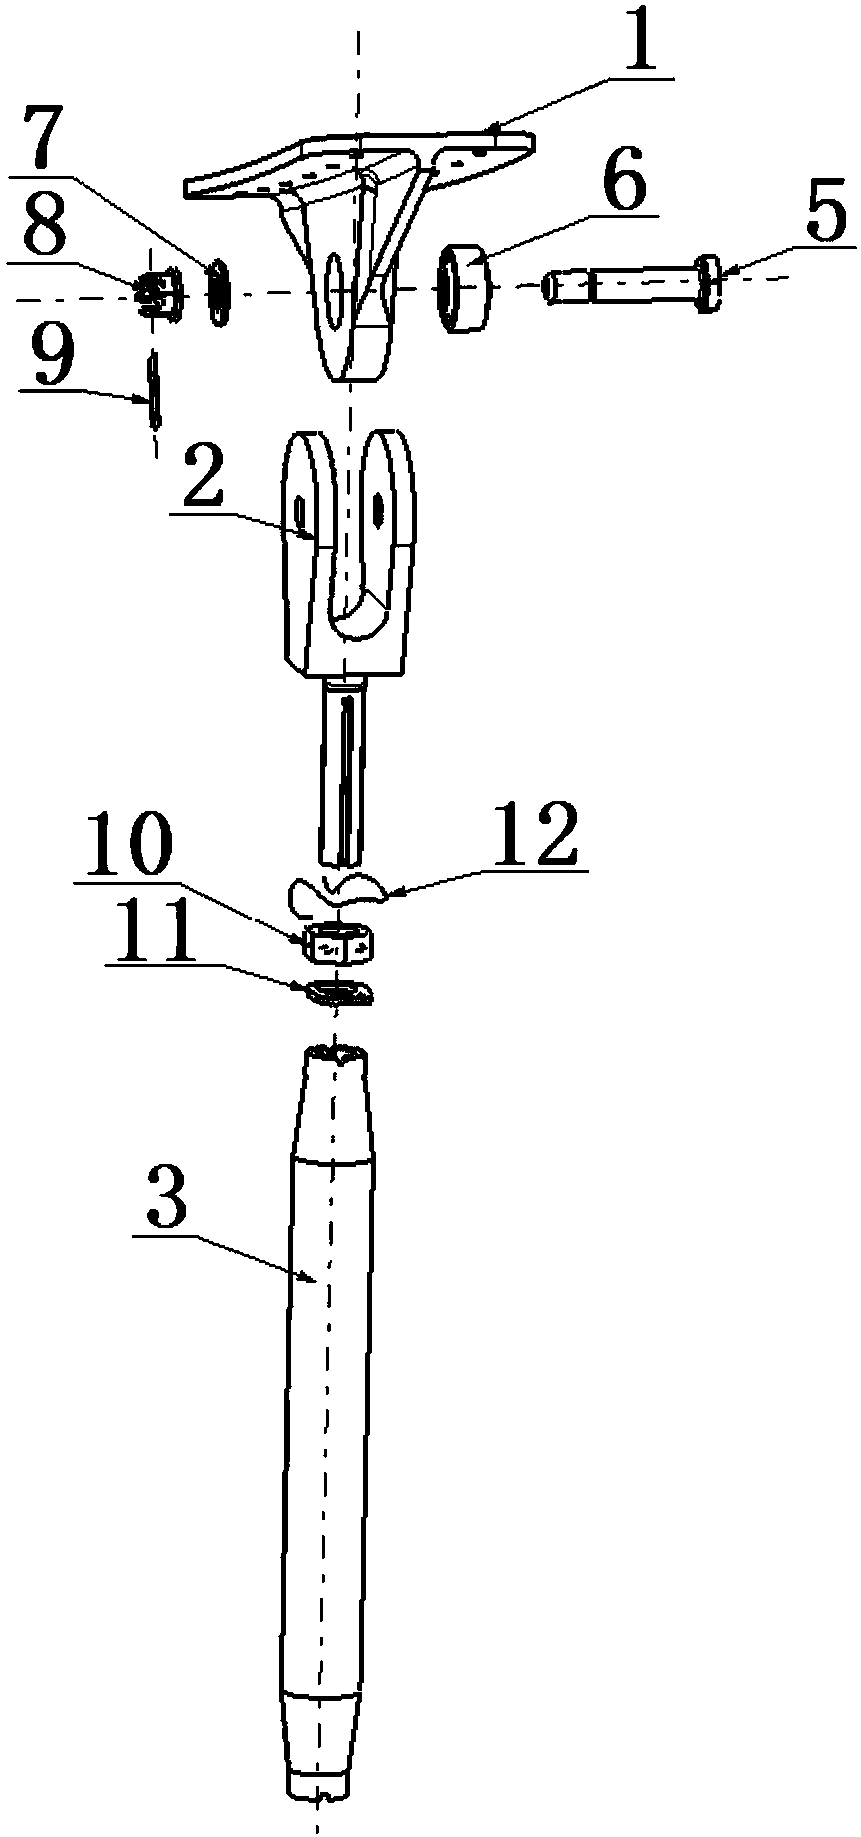 Adjustable pull rod assembly